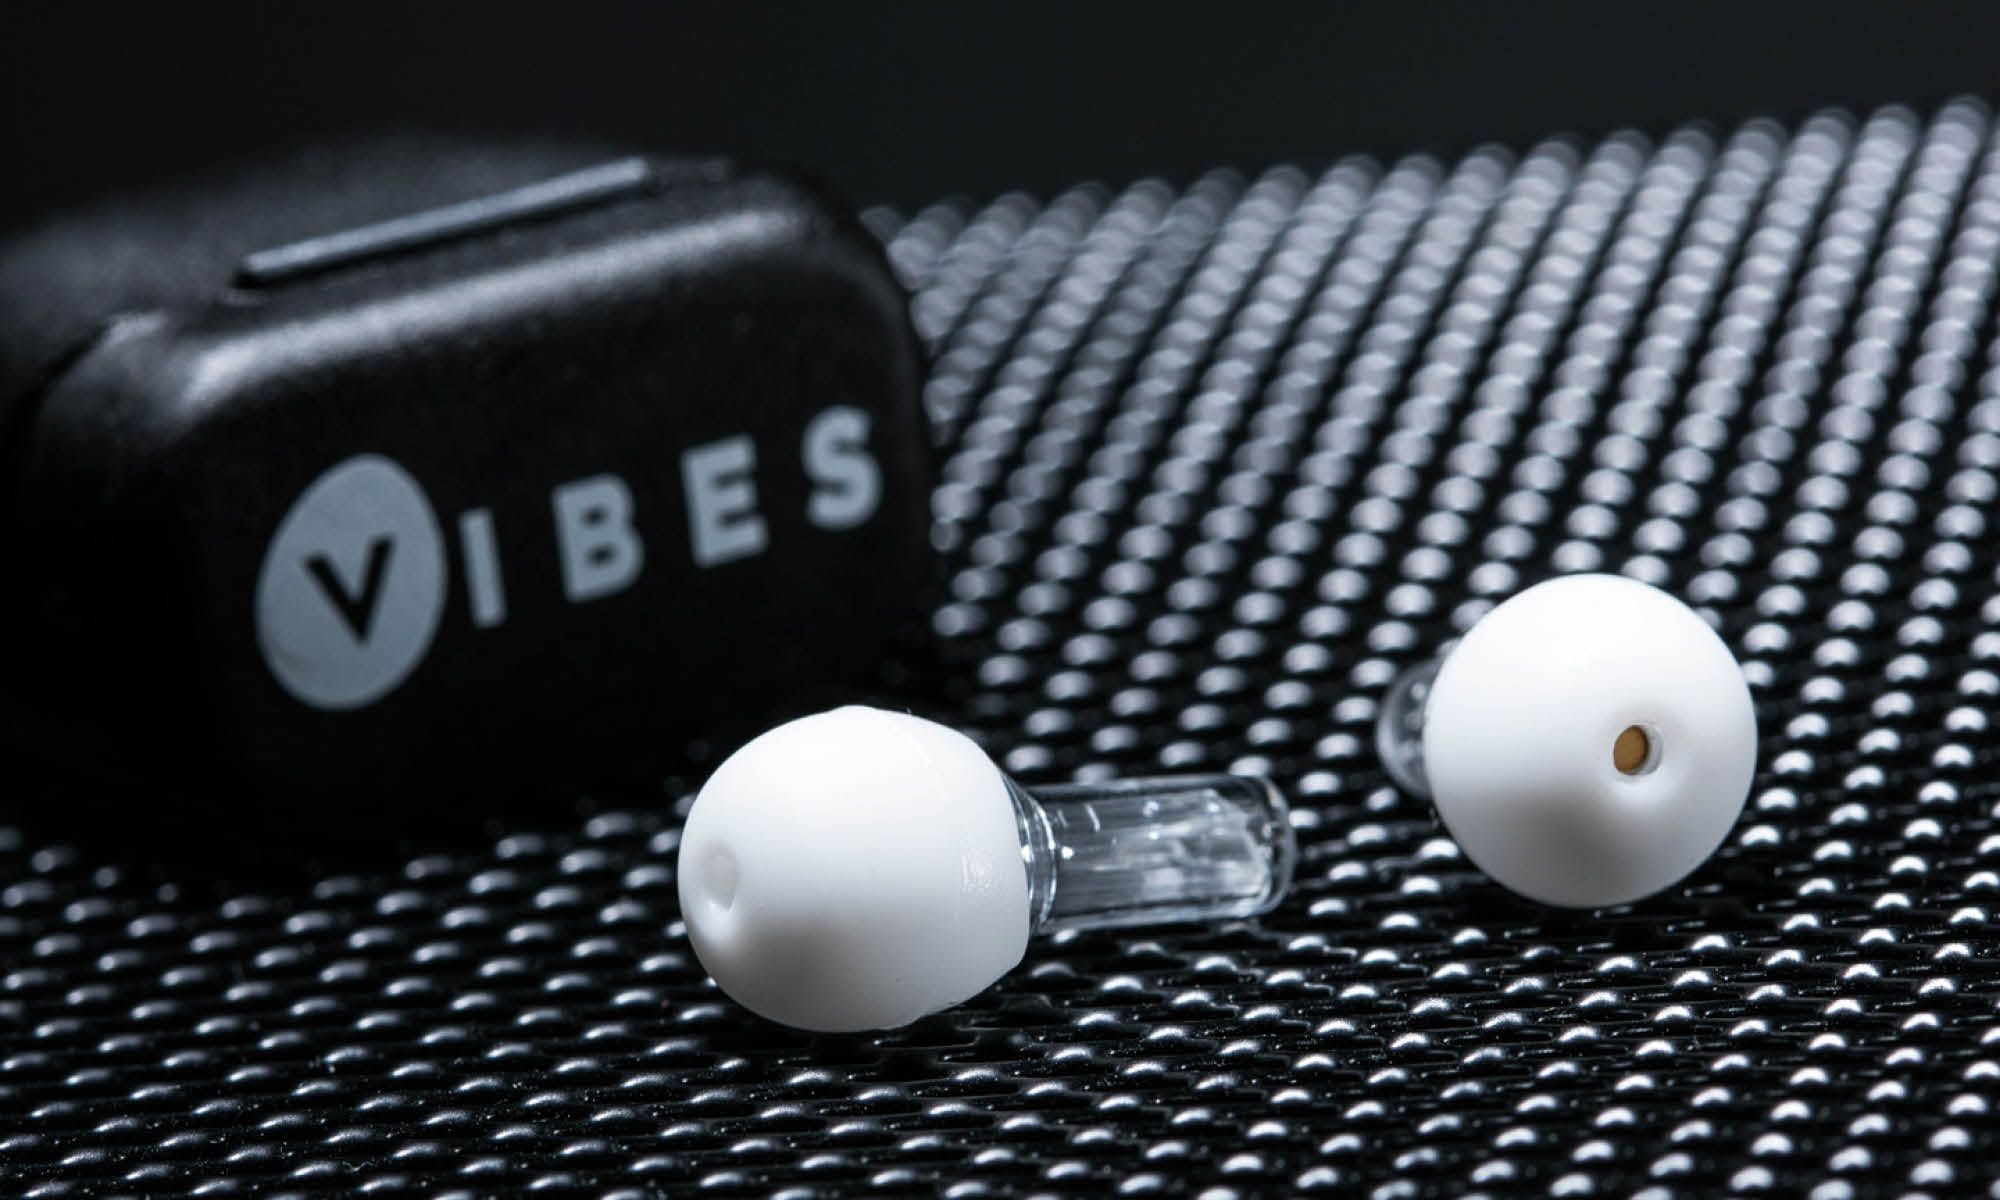 vibes-high-fidelity-earplugs-review-solid-unique-looking-concert-earplugs